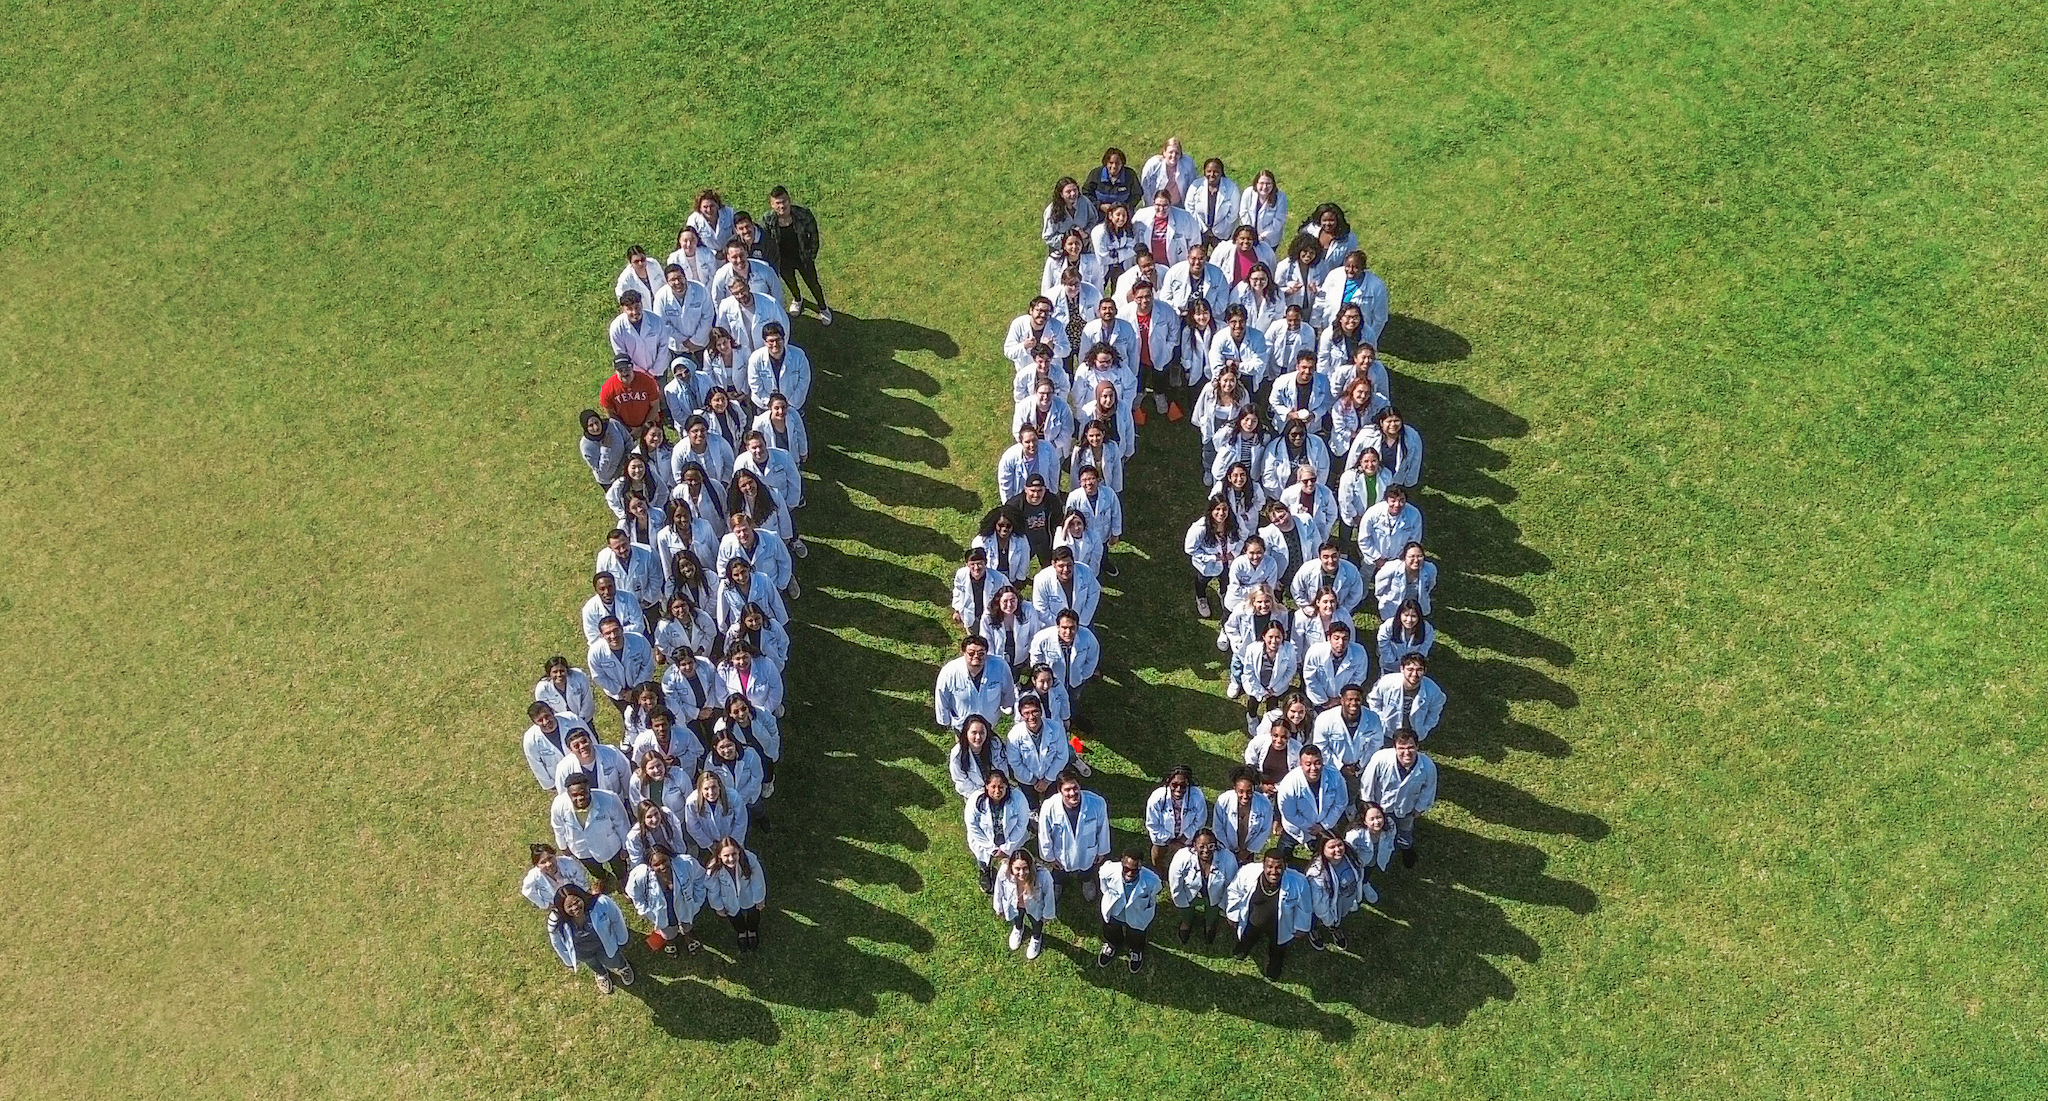 Photo of students in formation of the number ten for the College of Pharmacy 10th Anniversary